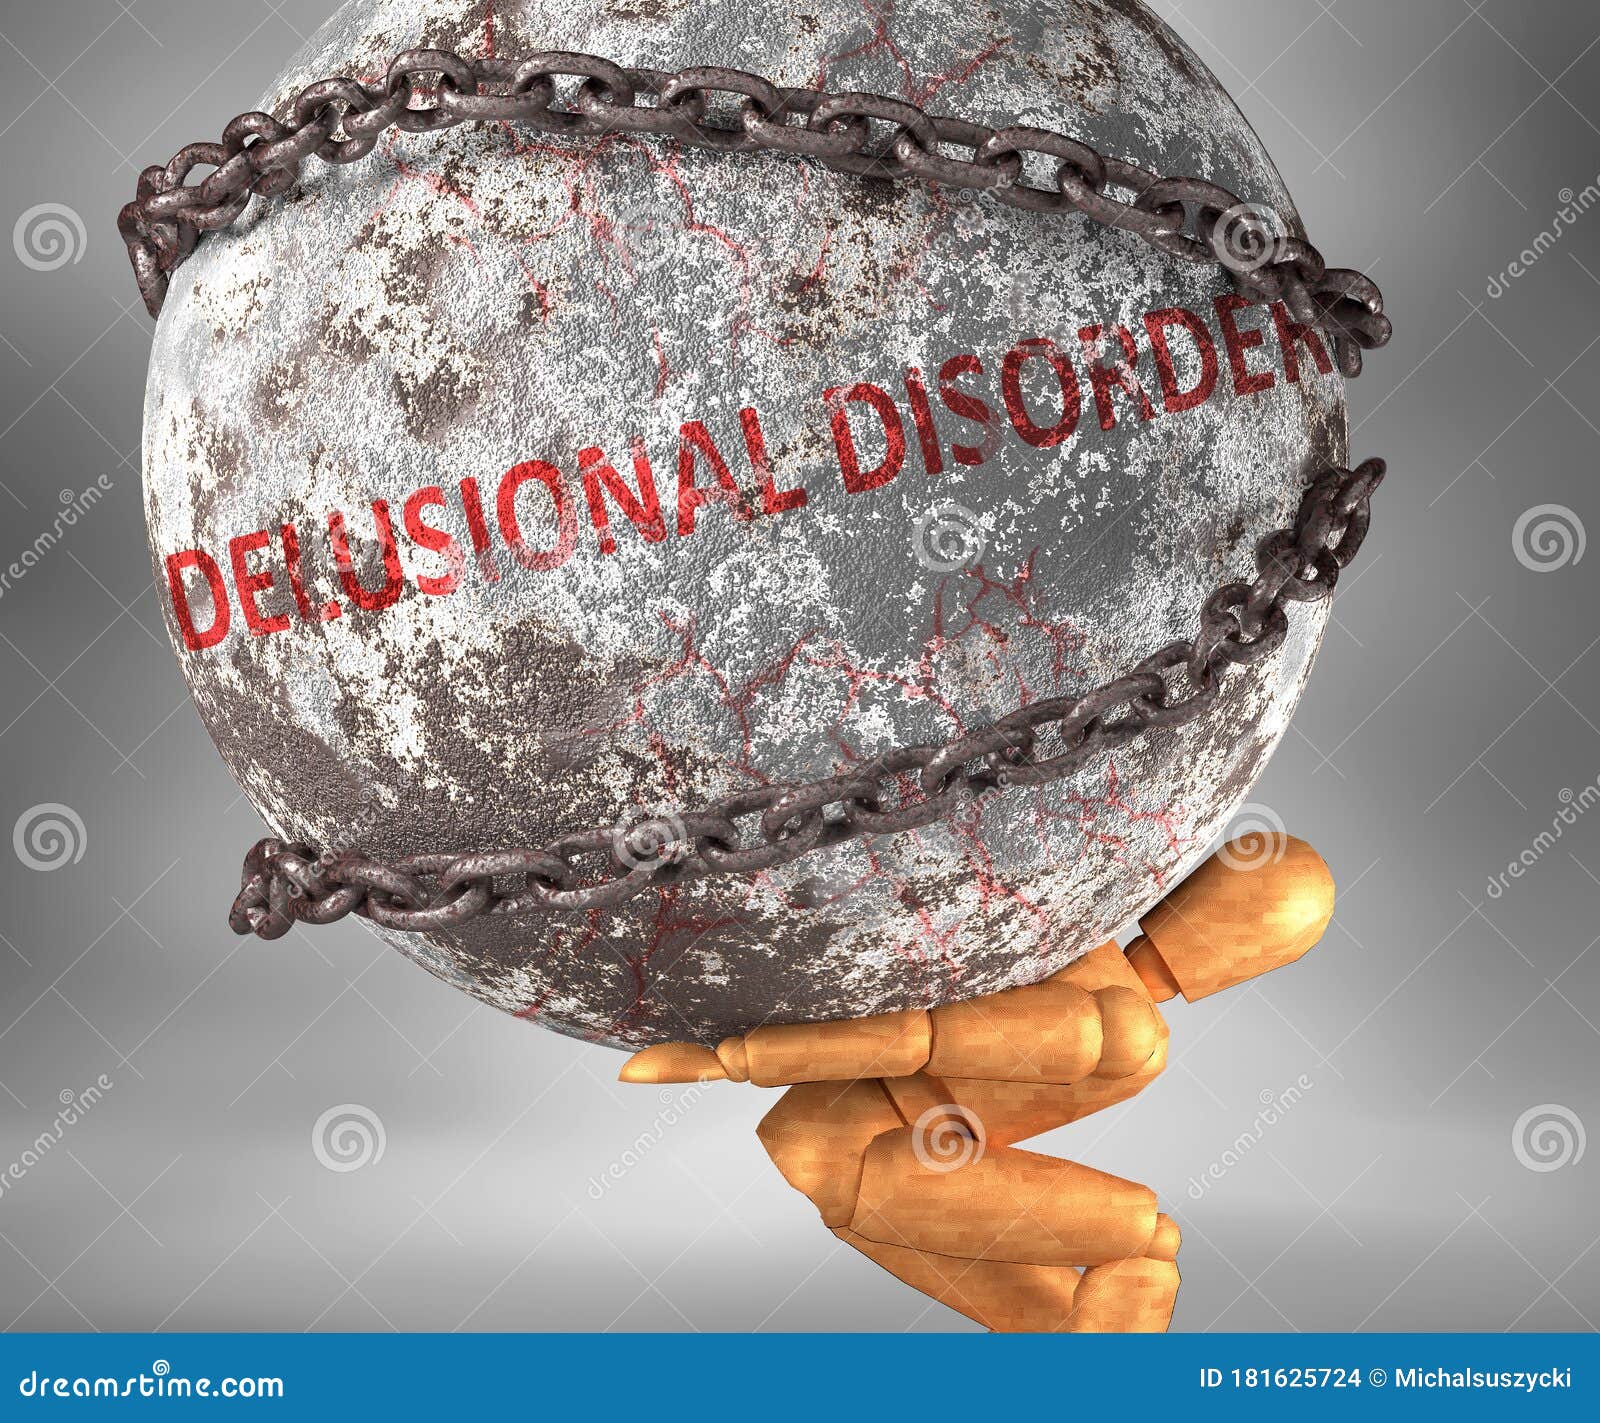 delusional disorder and hardship in life - pictured by word delusional disorder as a heavy weight on shoulders to ize